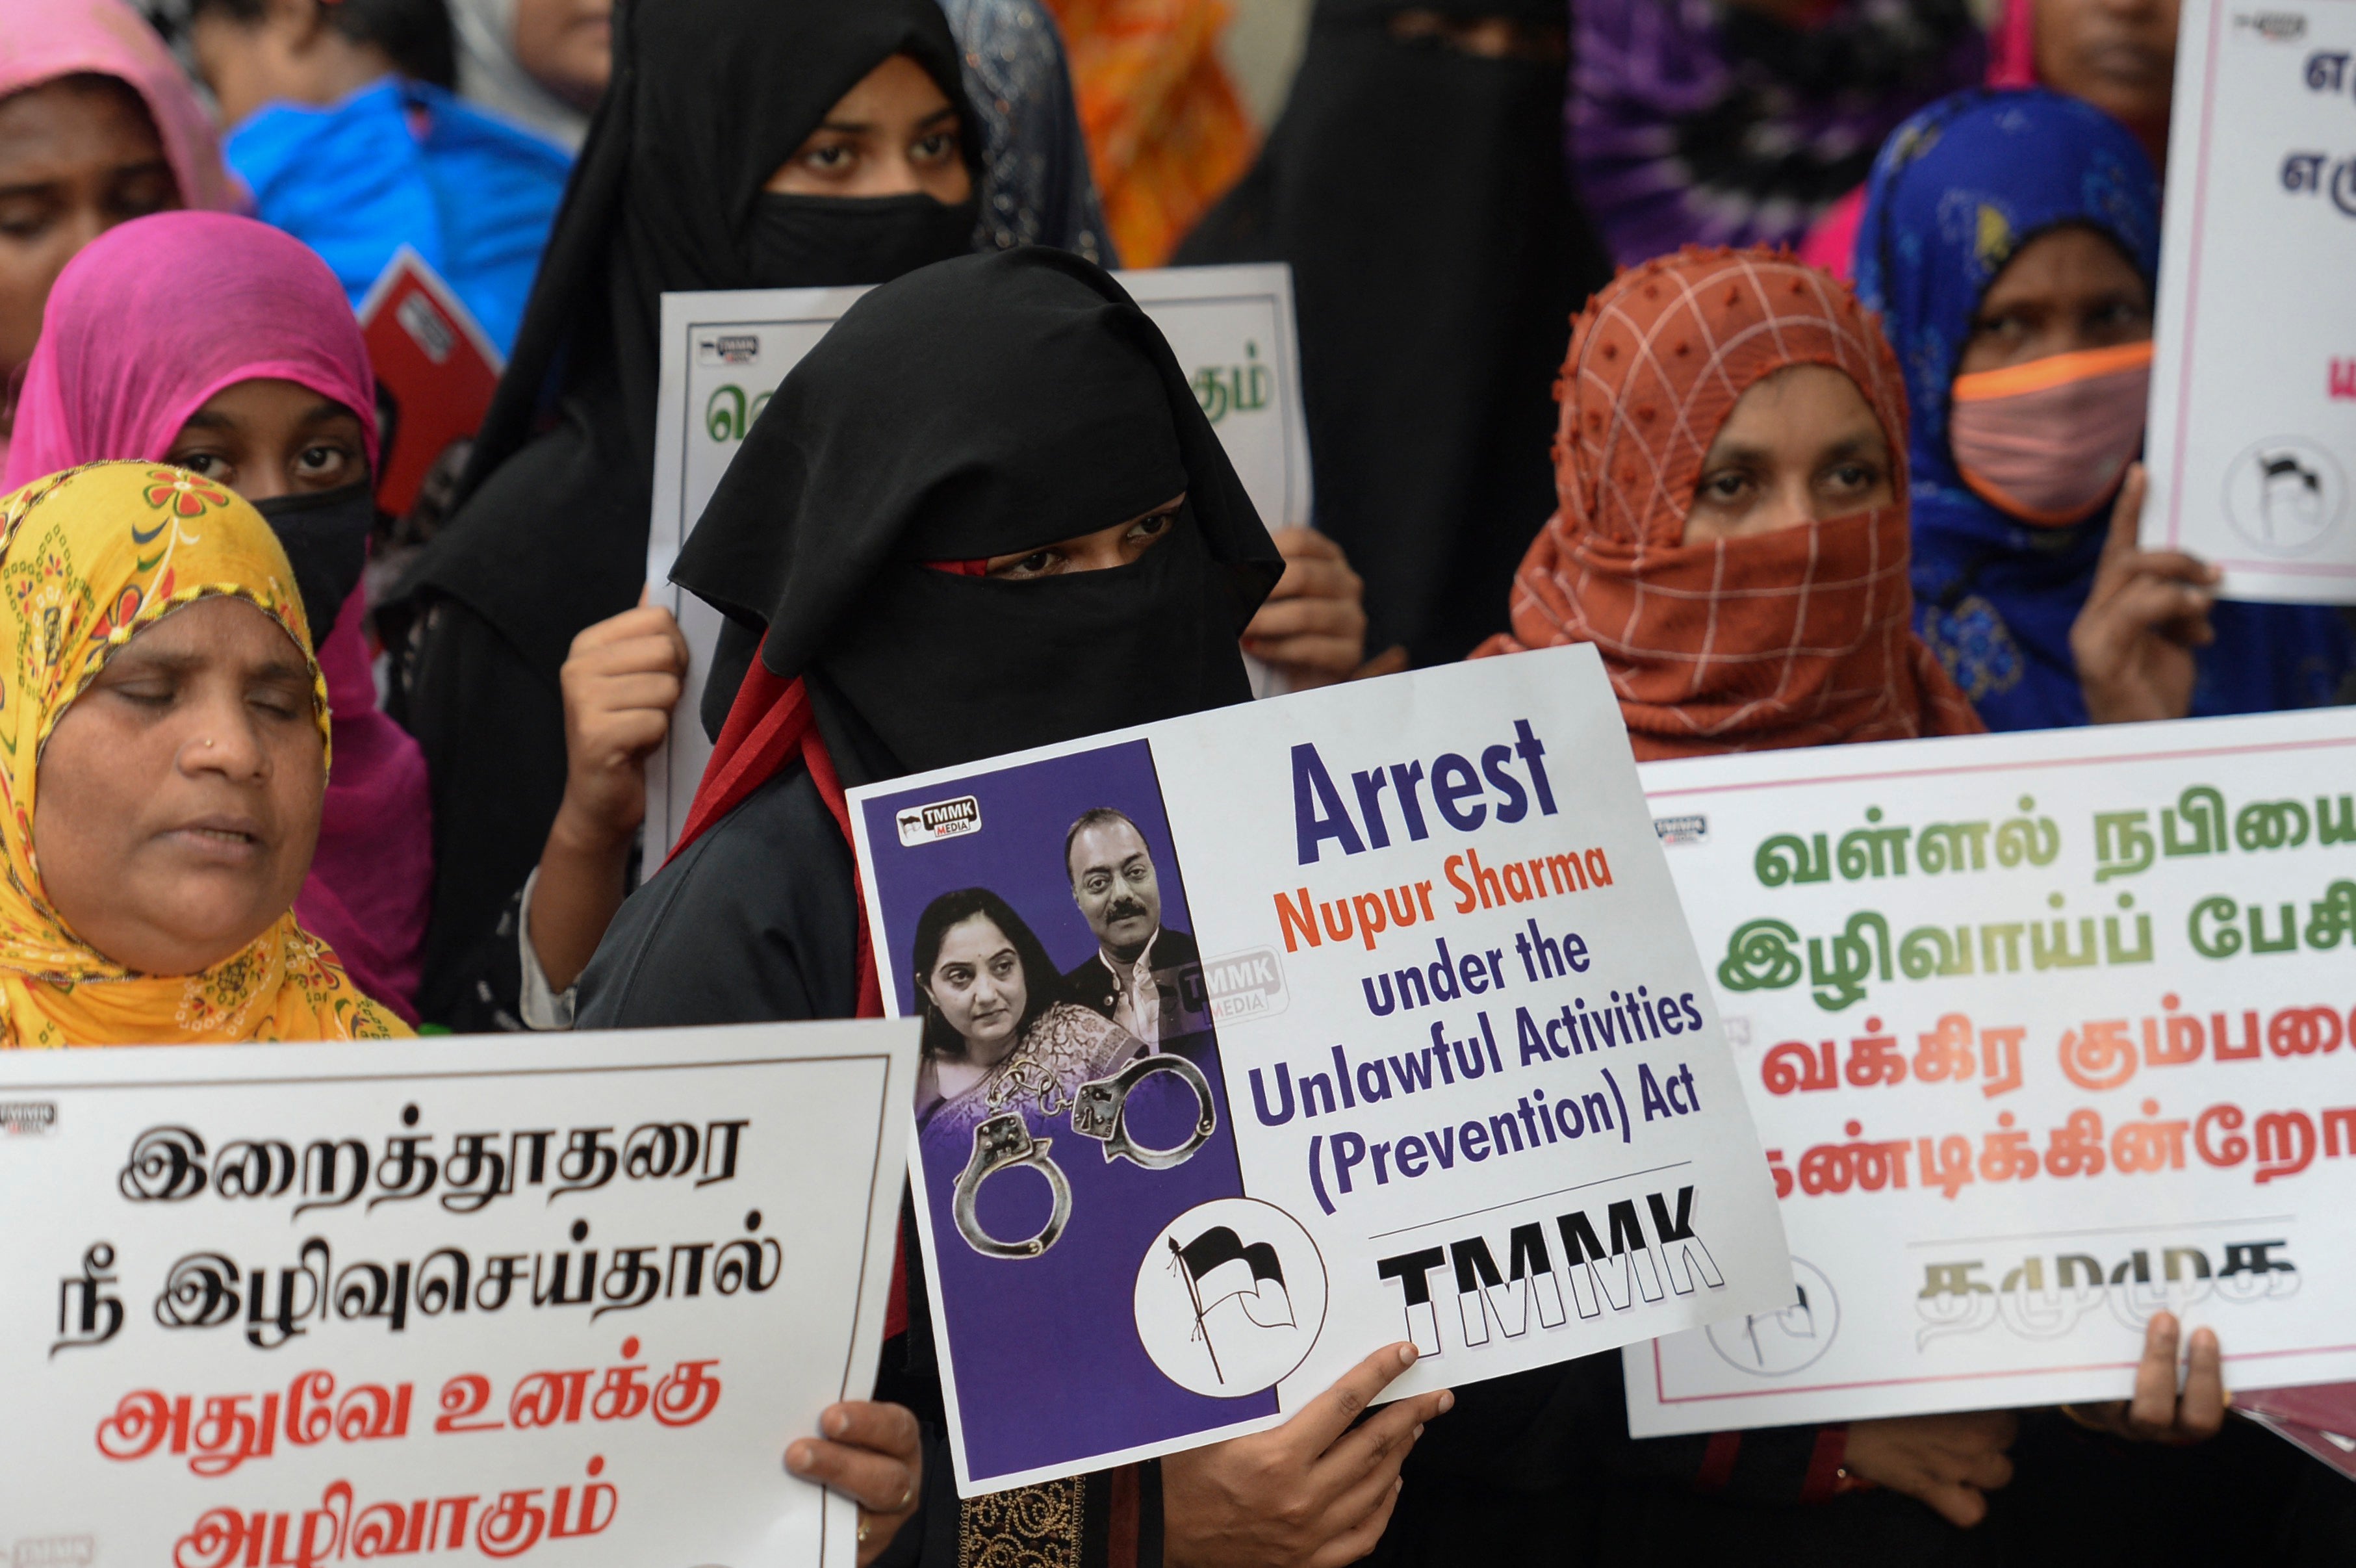 Muslim activists hold placards during a protest calling for the arrest of former BJP spokesperson Nupur Sharma in Chennai